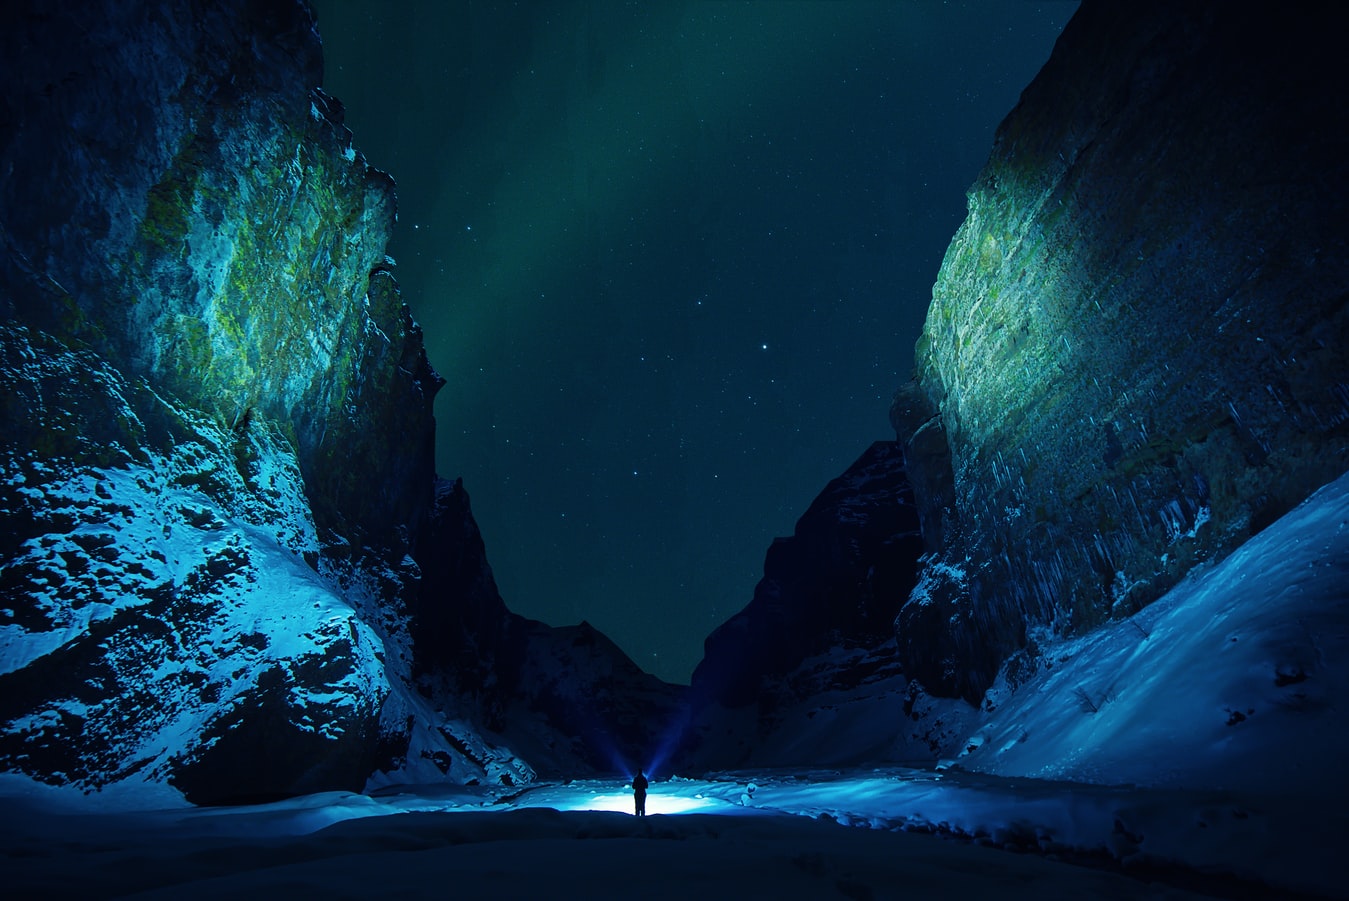 Northern lights in Iceland Canyon